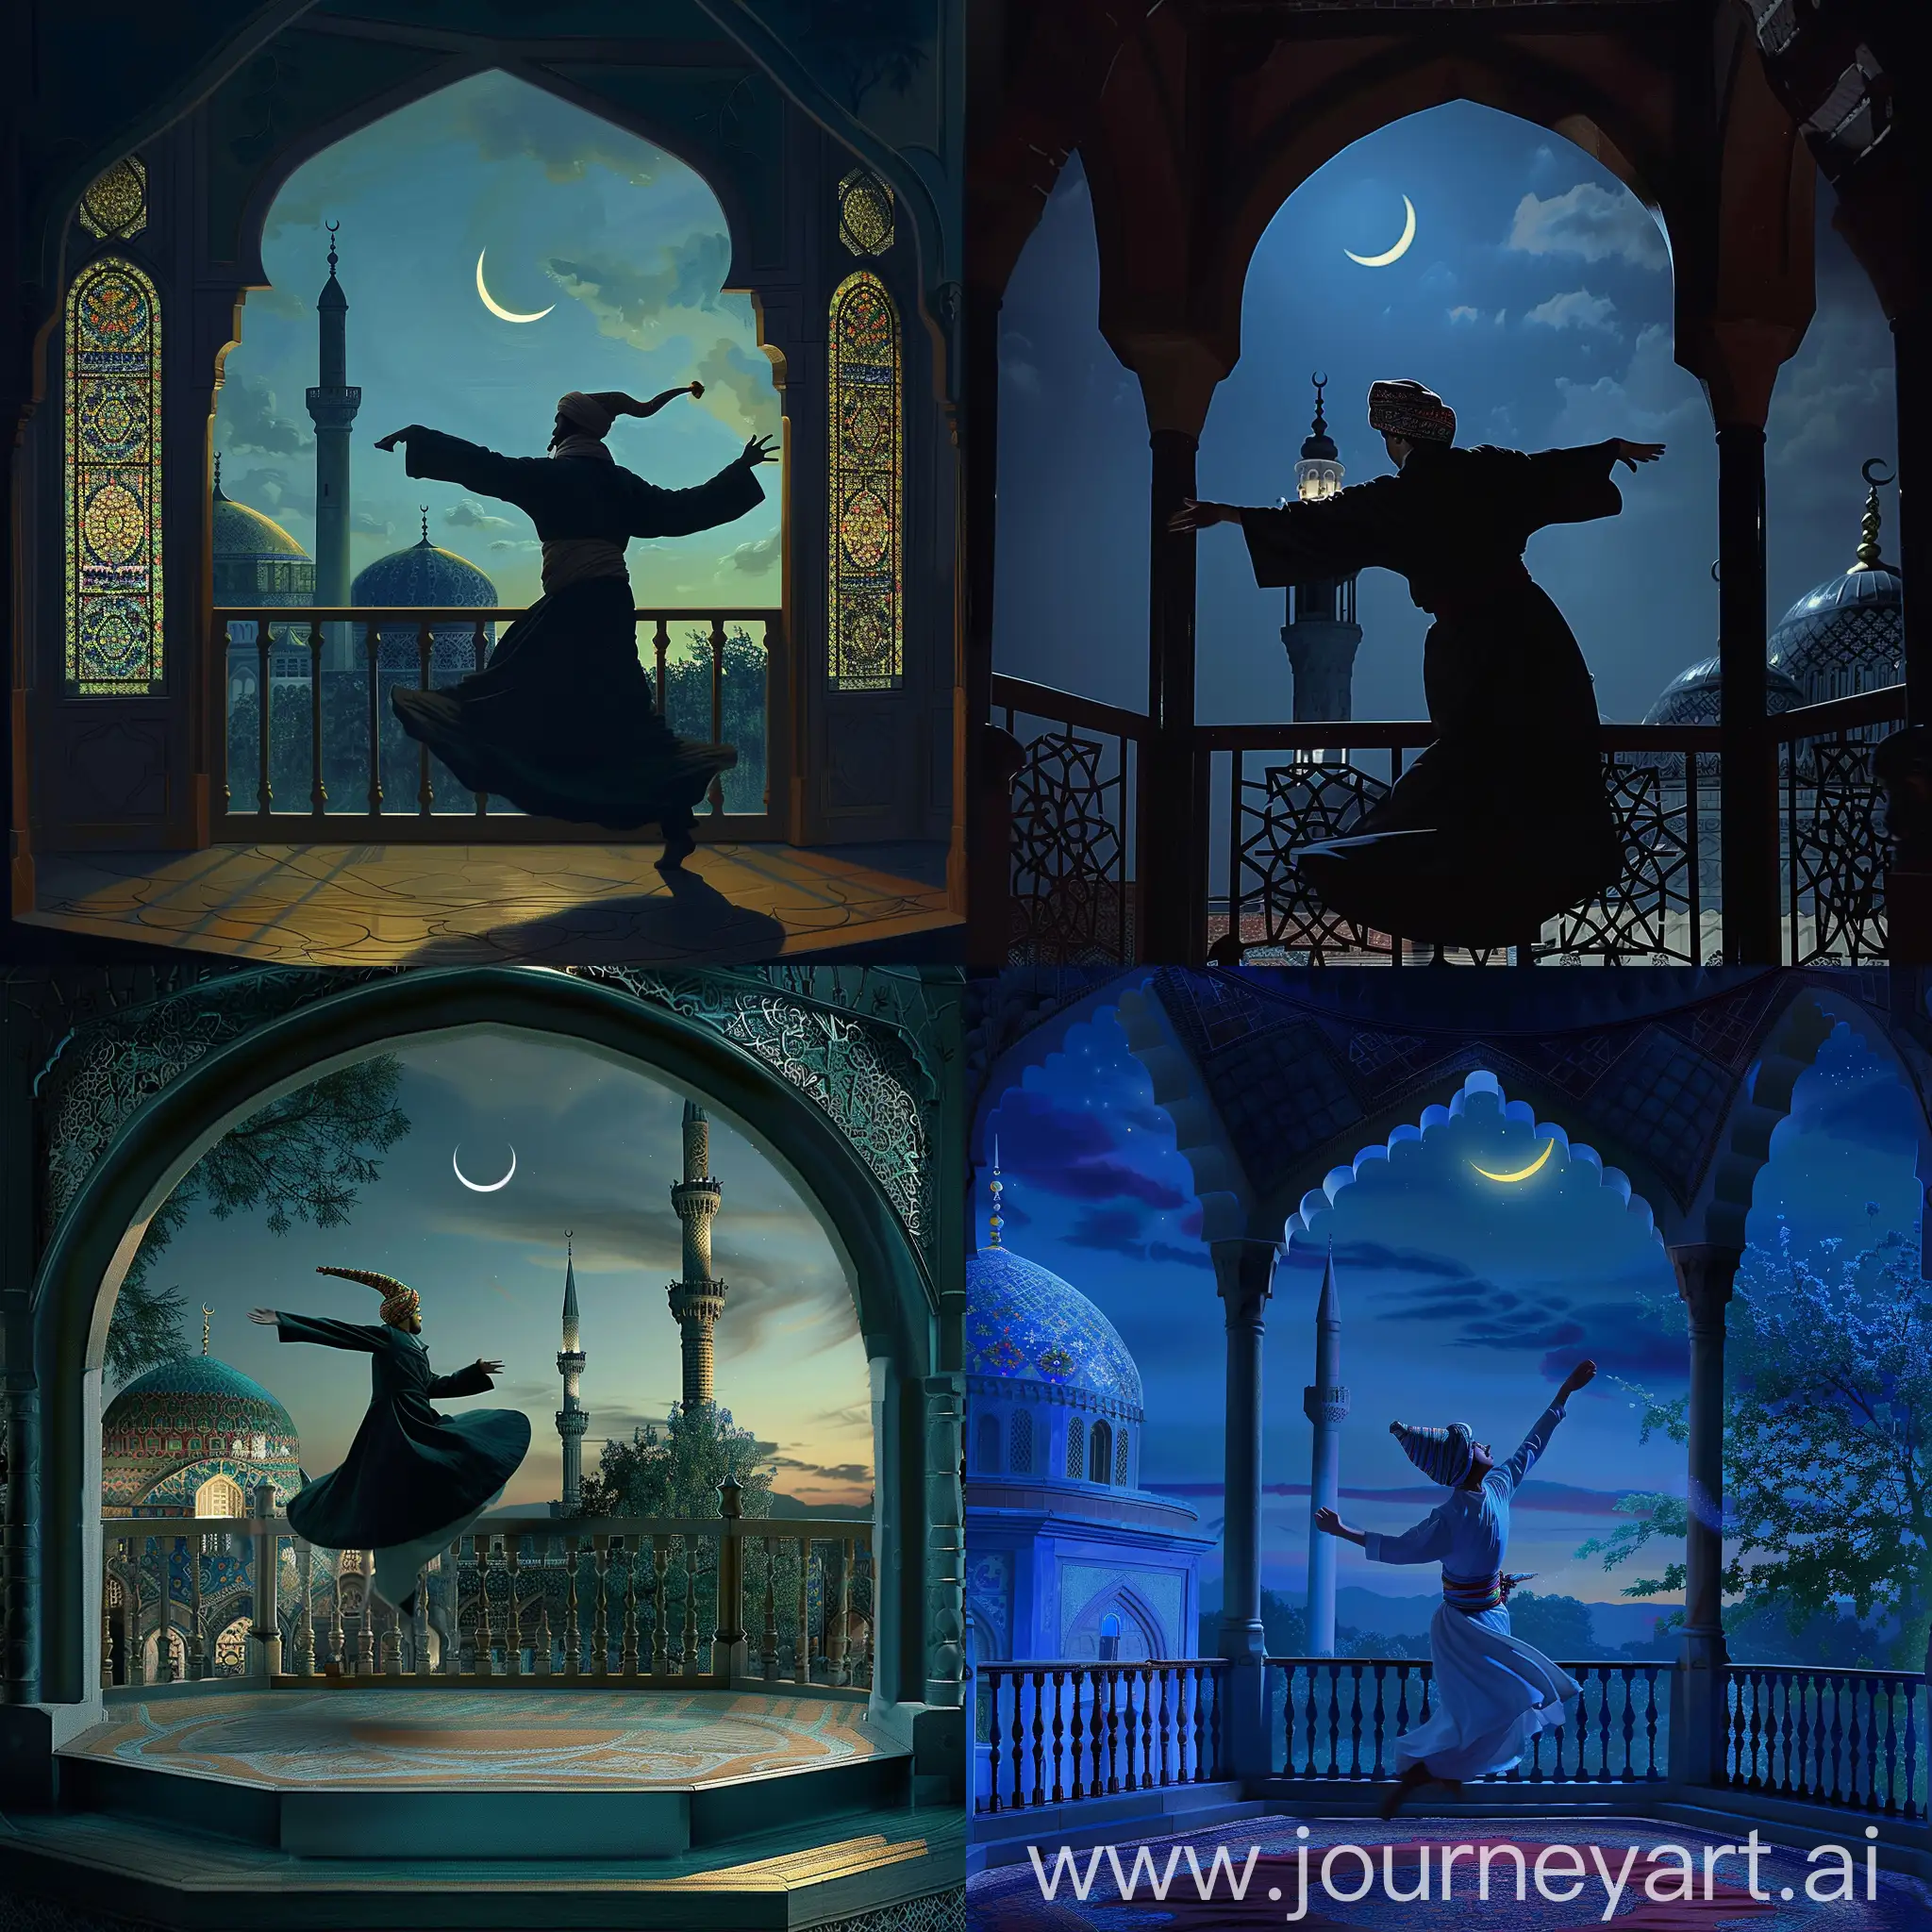 Whirling-Dervish-in-Fez-Cap-Sufi-Whirling-at-Serene-Night-Mosque